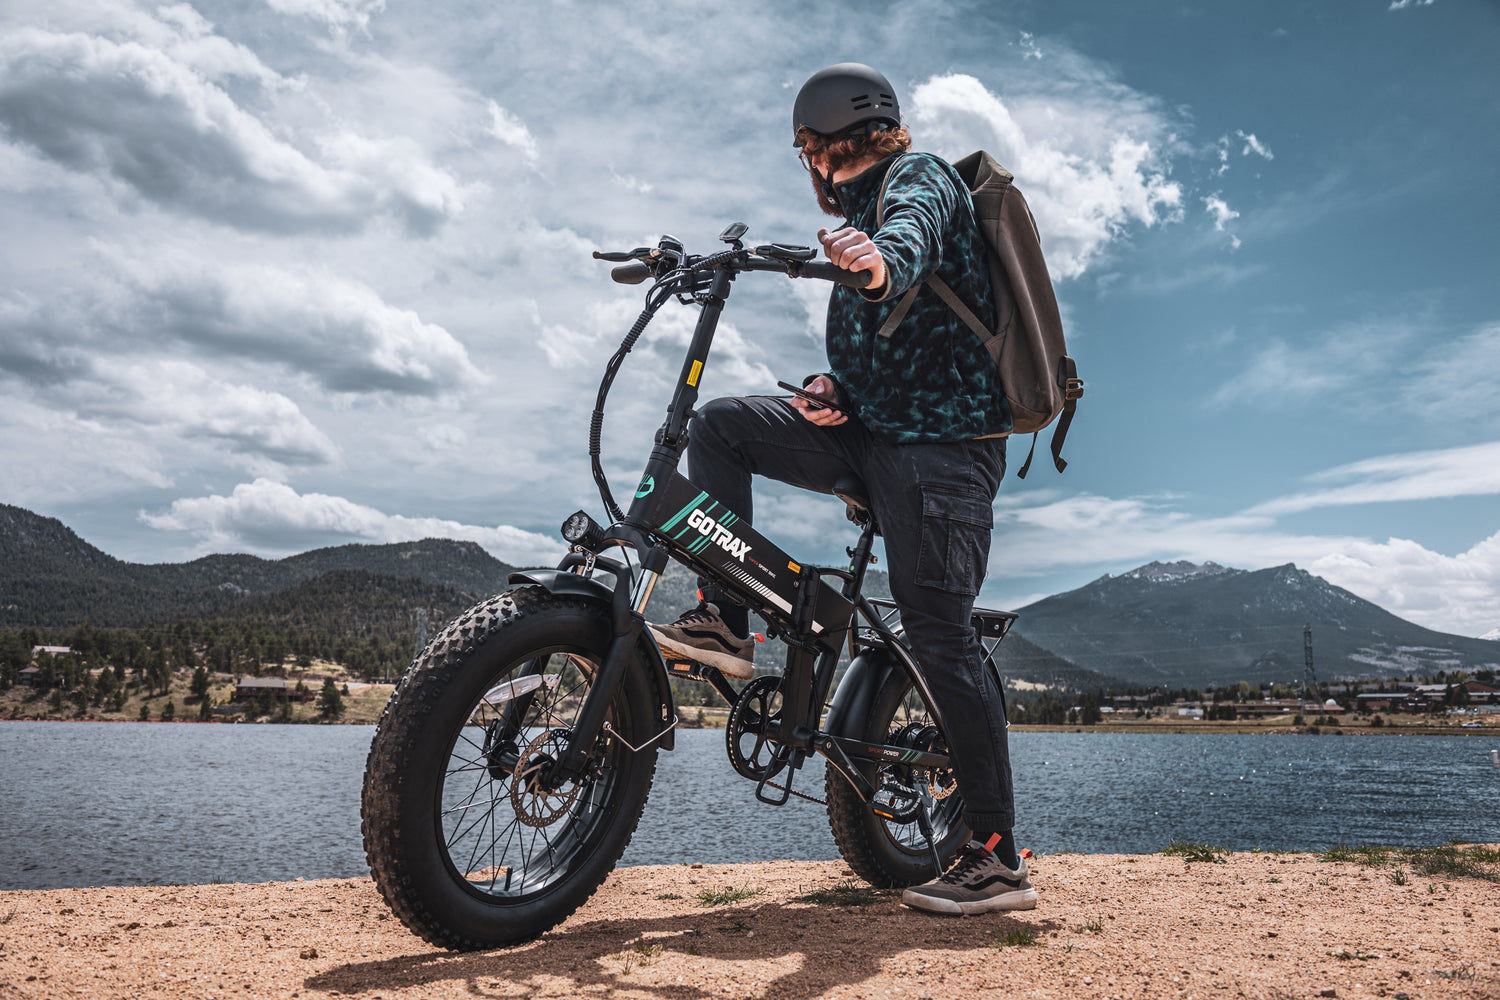 Product Overview: The EBE4 Fat Tire Electric Bike